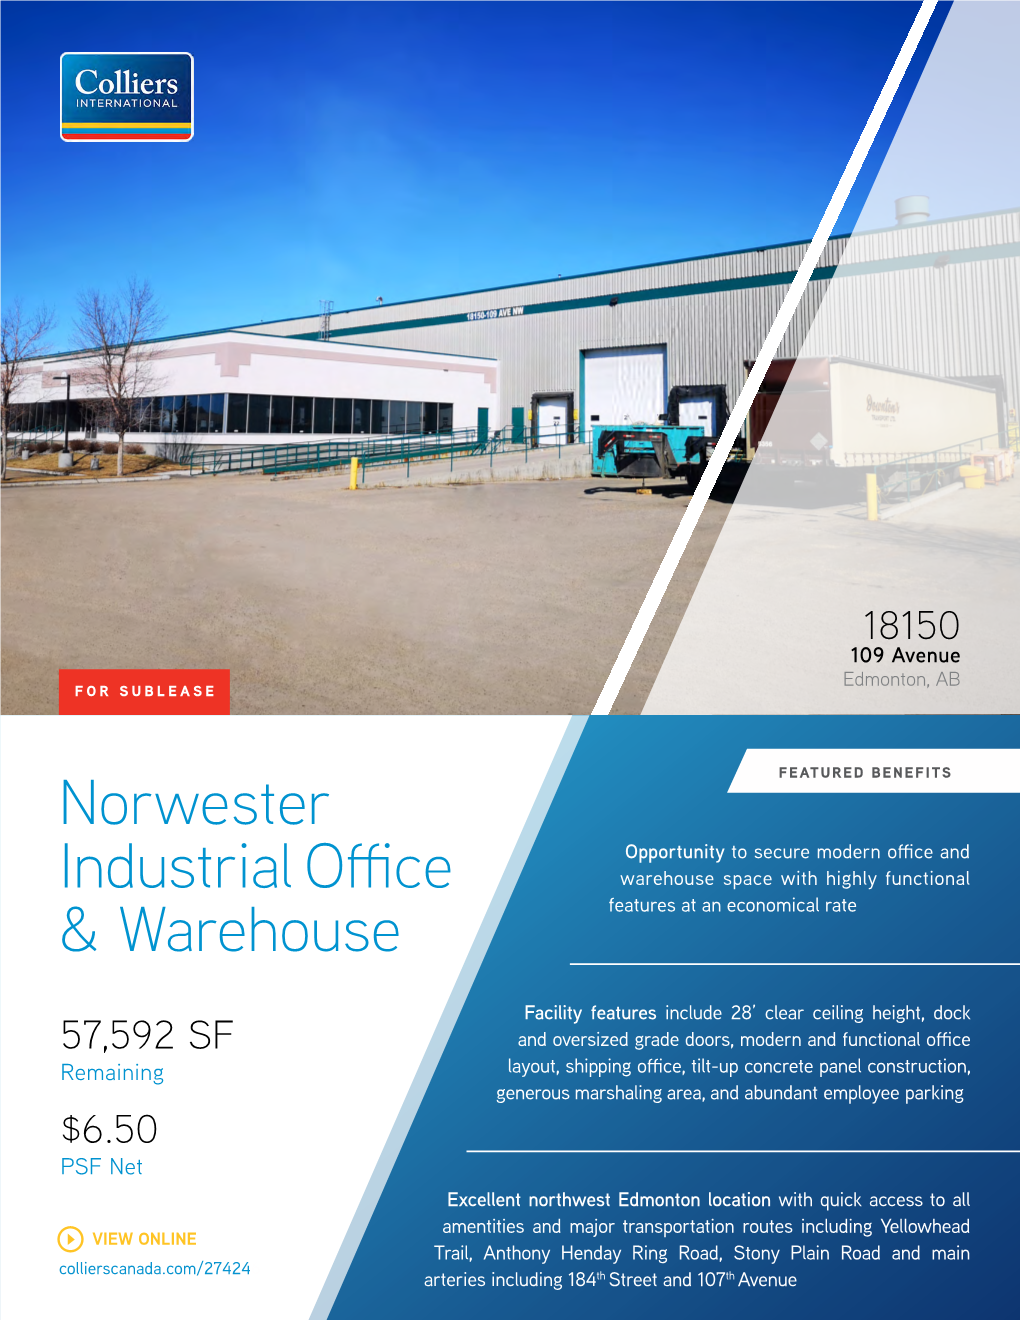 Norwester Industrial Office & Warehouse